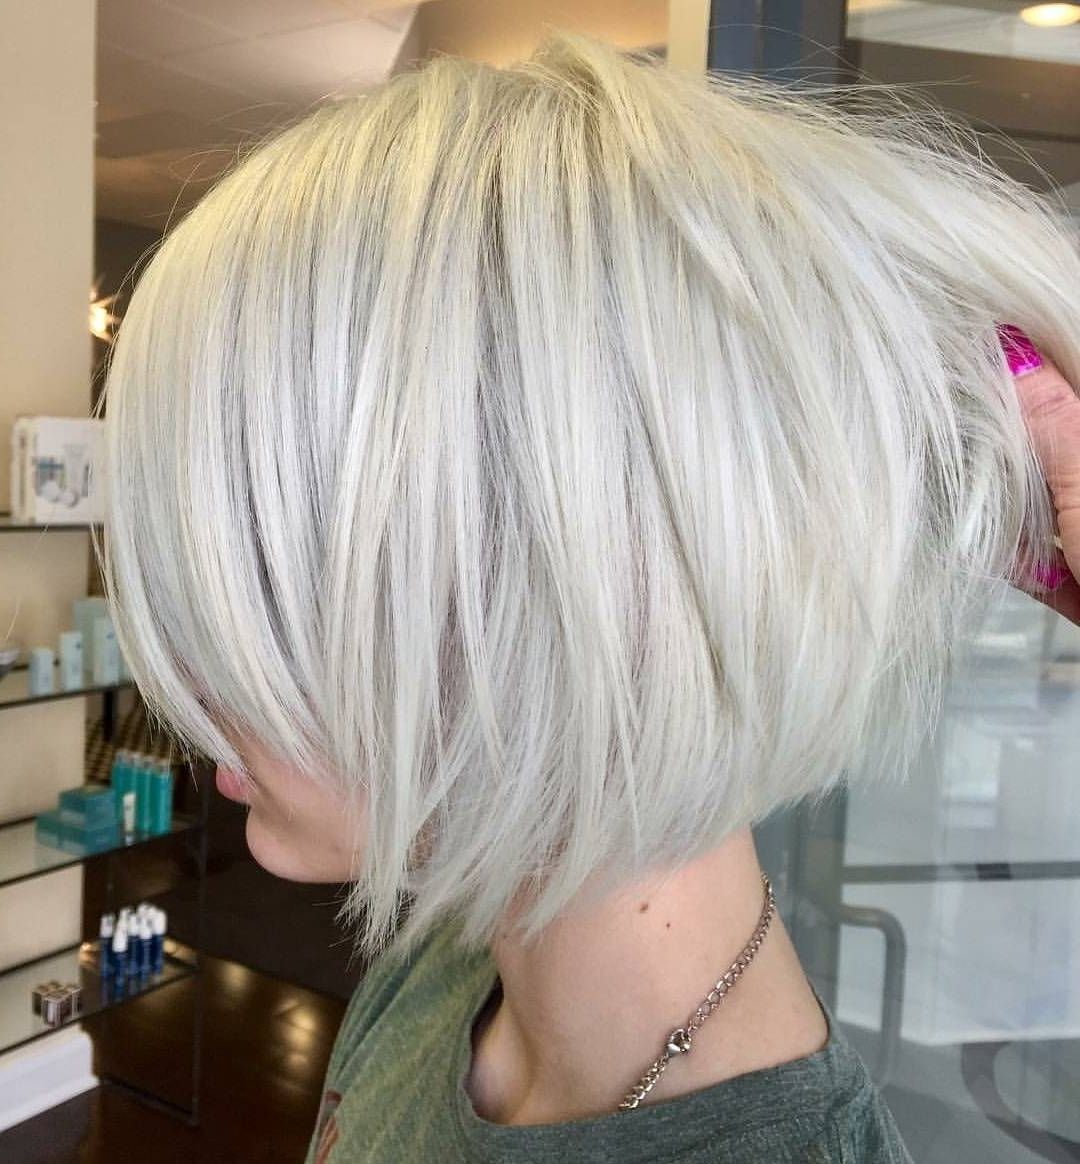 Latest Icy Blonde Shaggy Bob Hairstyles In 10 Layered Bob Hairstyles – Look Fab In New Blonde Shades! – Popular (View 7 of 20)